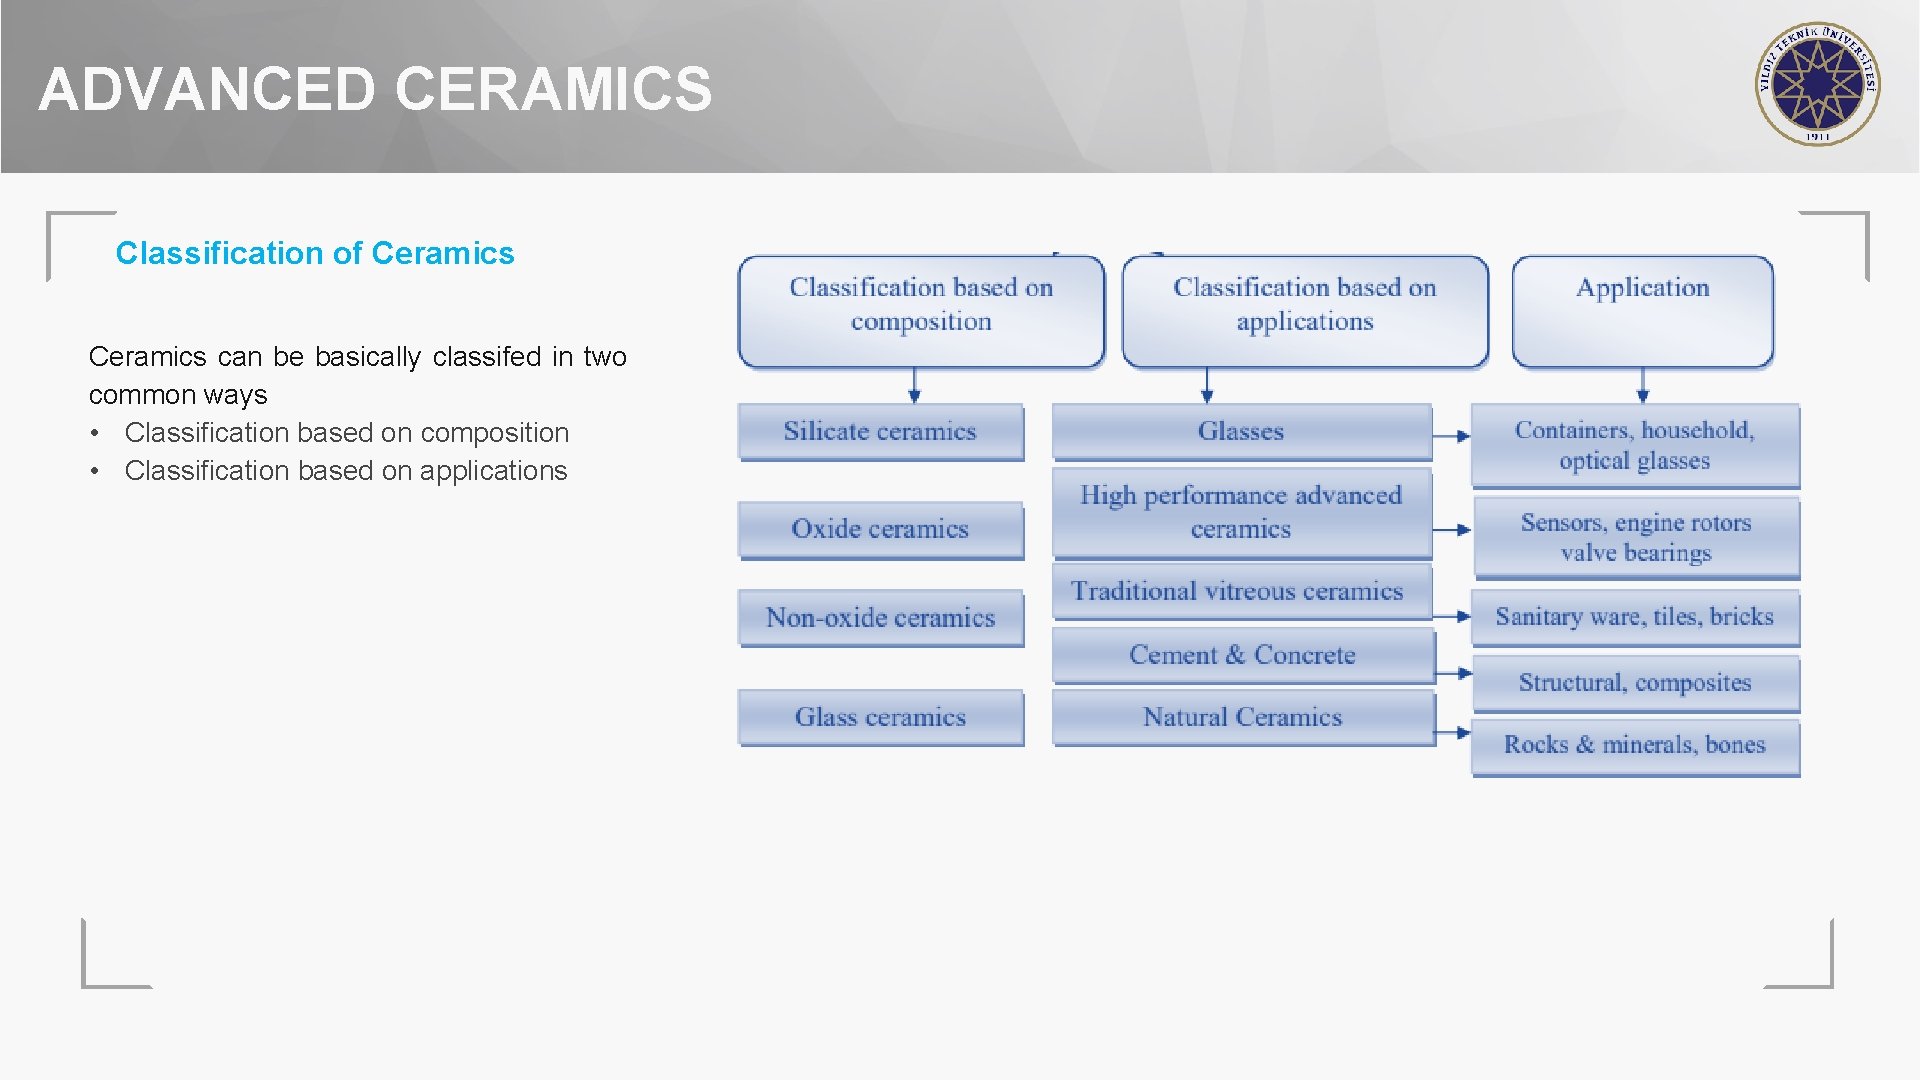 ADVANCED CERAMICS Classification of Ceramics can be basically classifed in two common ways •